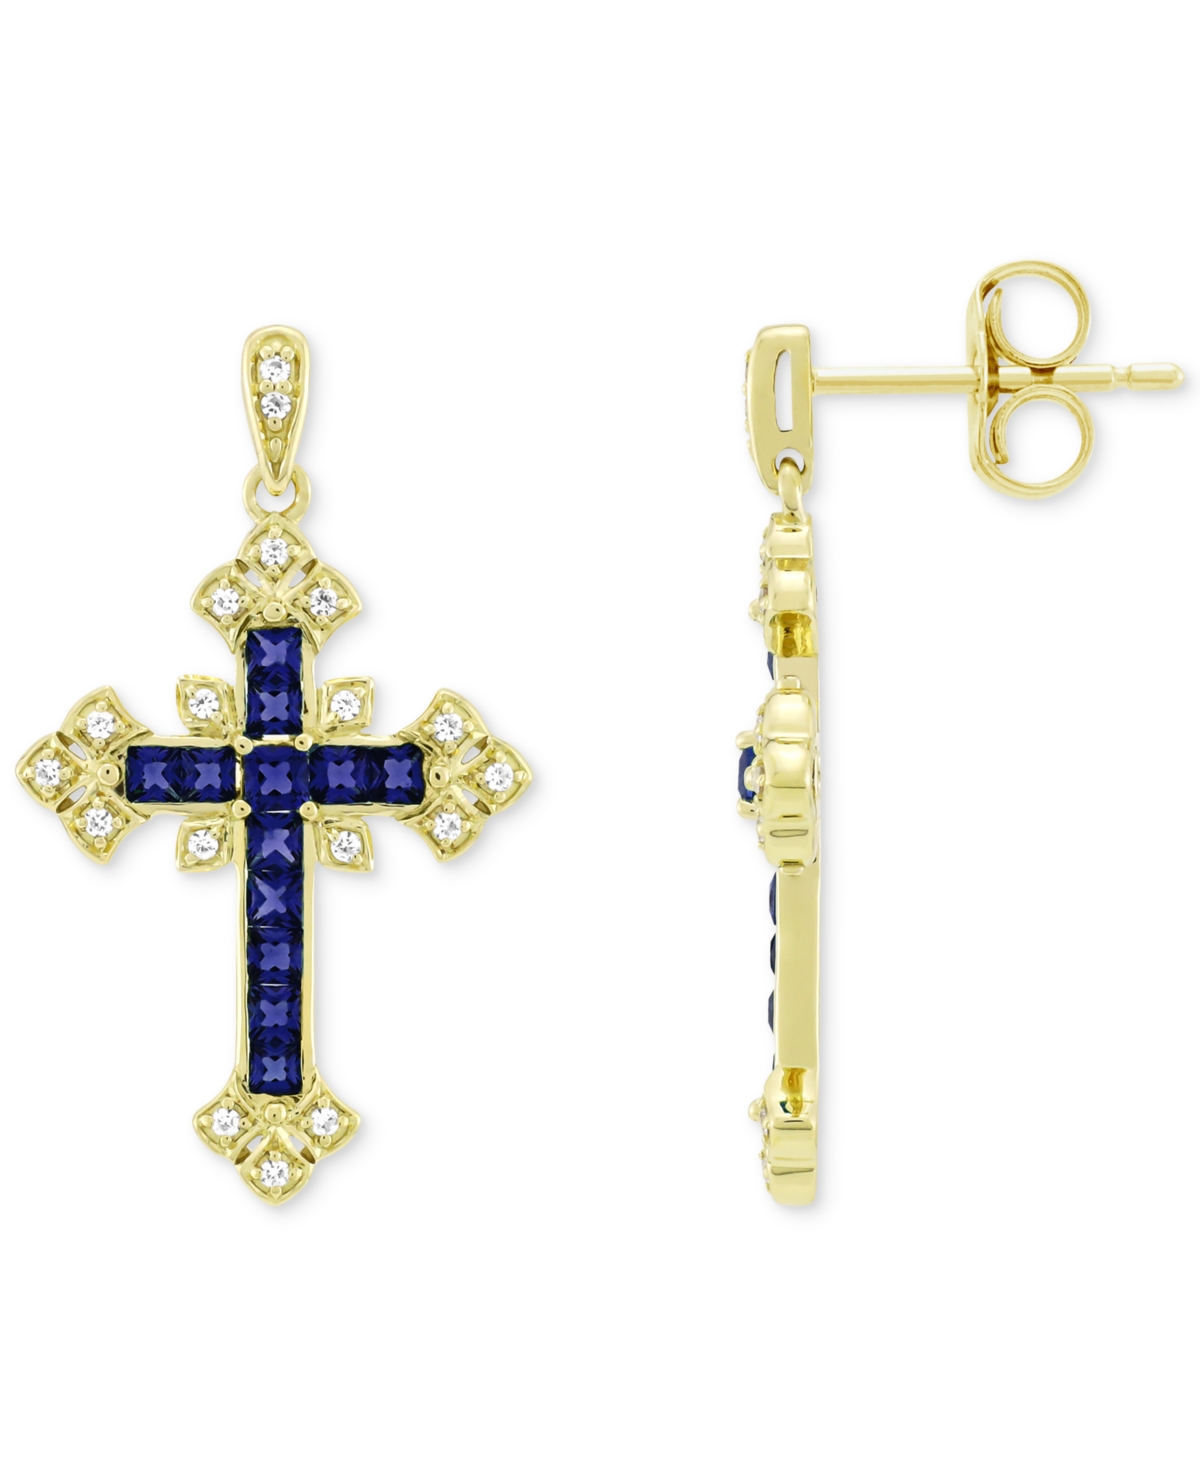 Lab-Grown Blue Sapphire (5/8 ct. t.w.) & Lab-Grown White Sapphire (1/10 ct. t.w.) Ornate Cross Drop Earrings in 14k Gold-Plated Sterling Silver (Also